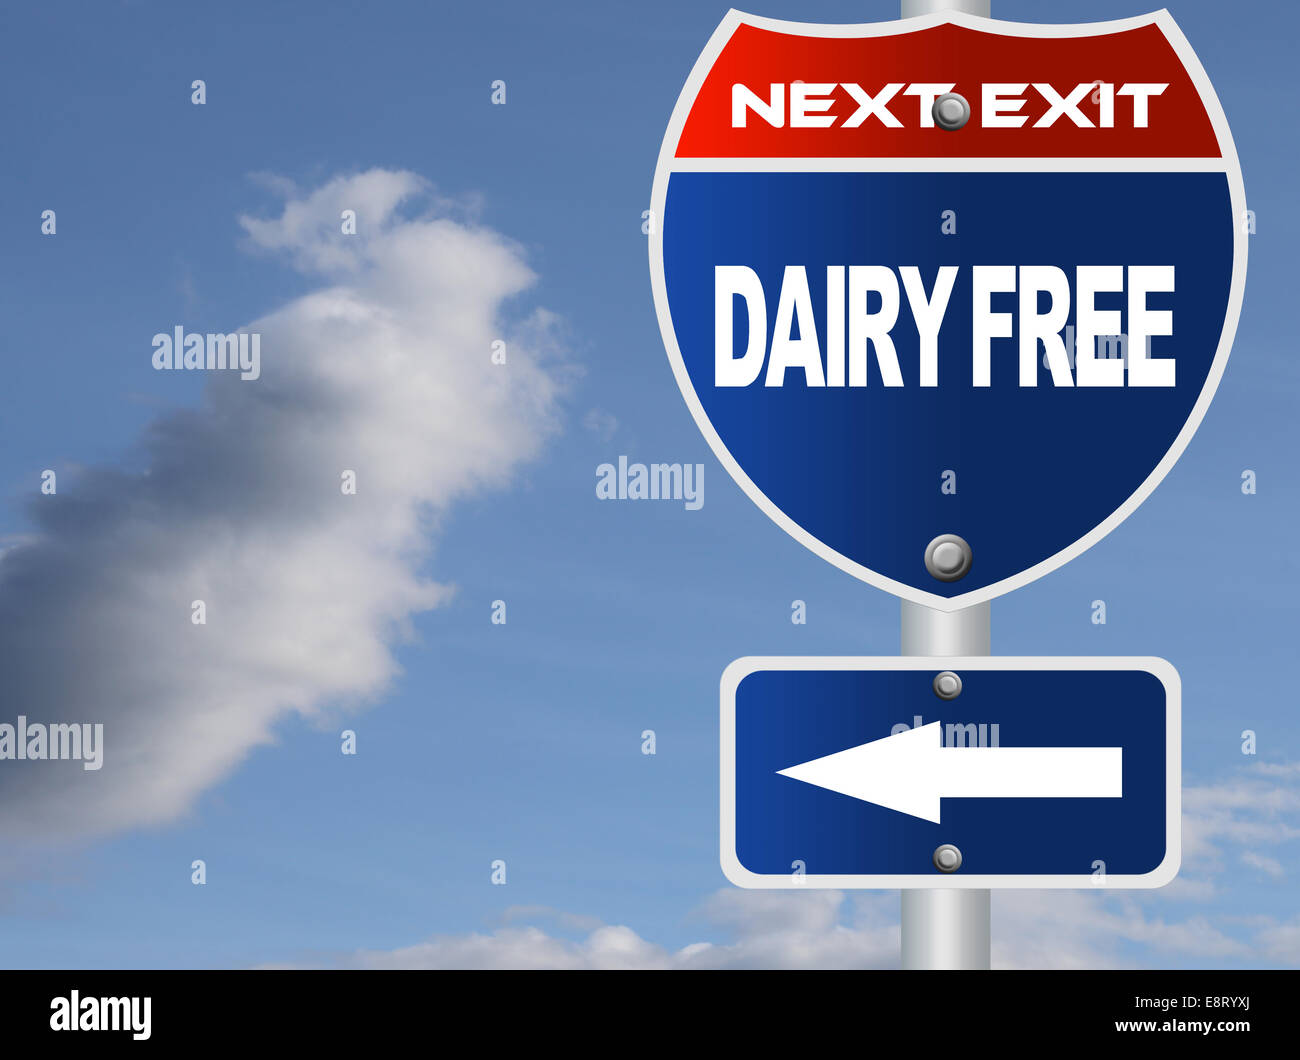 Dairy free road sign Stock Photo